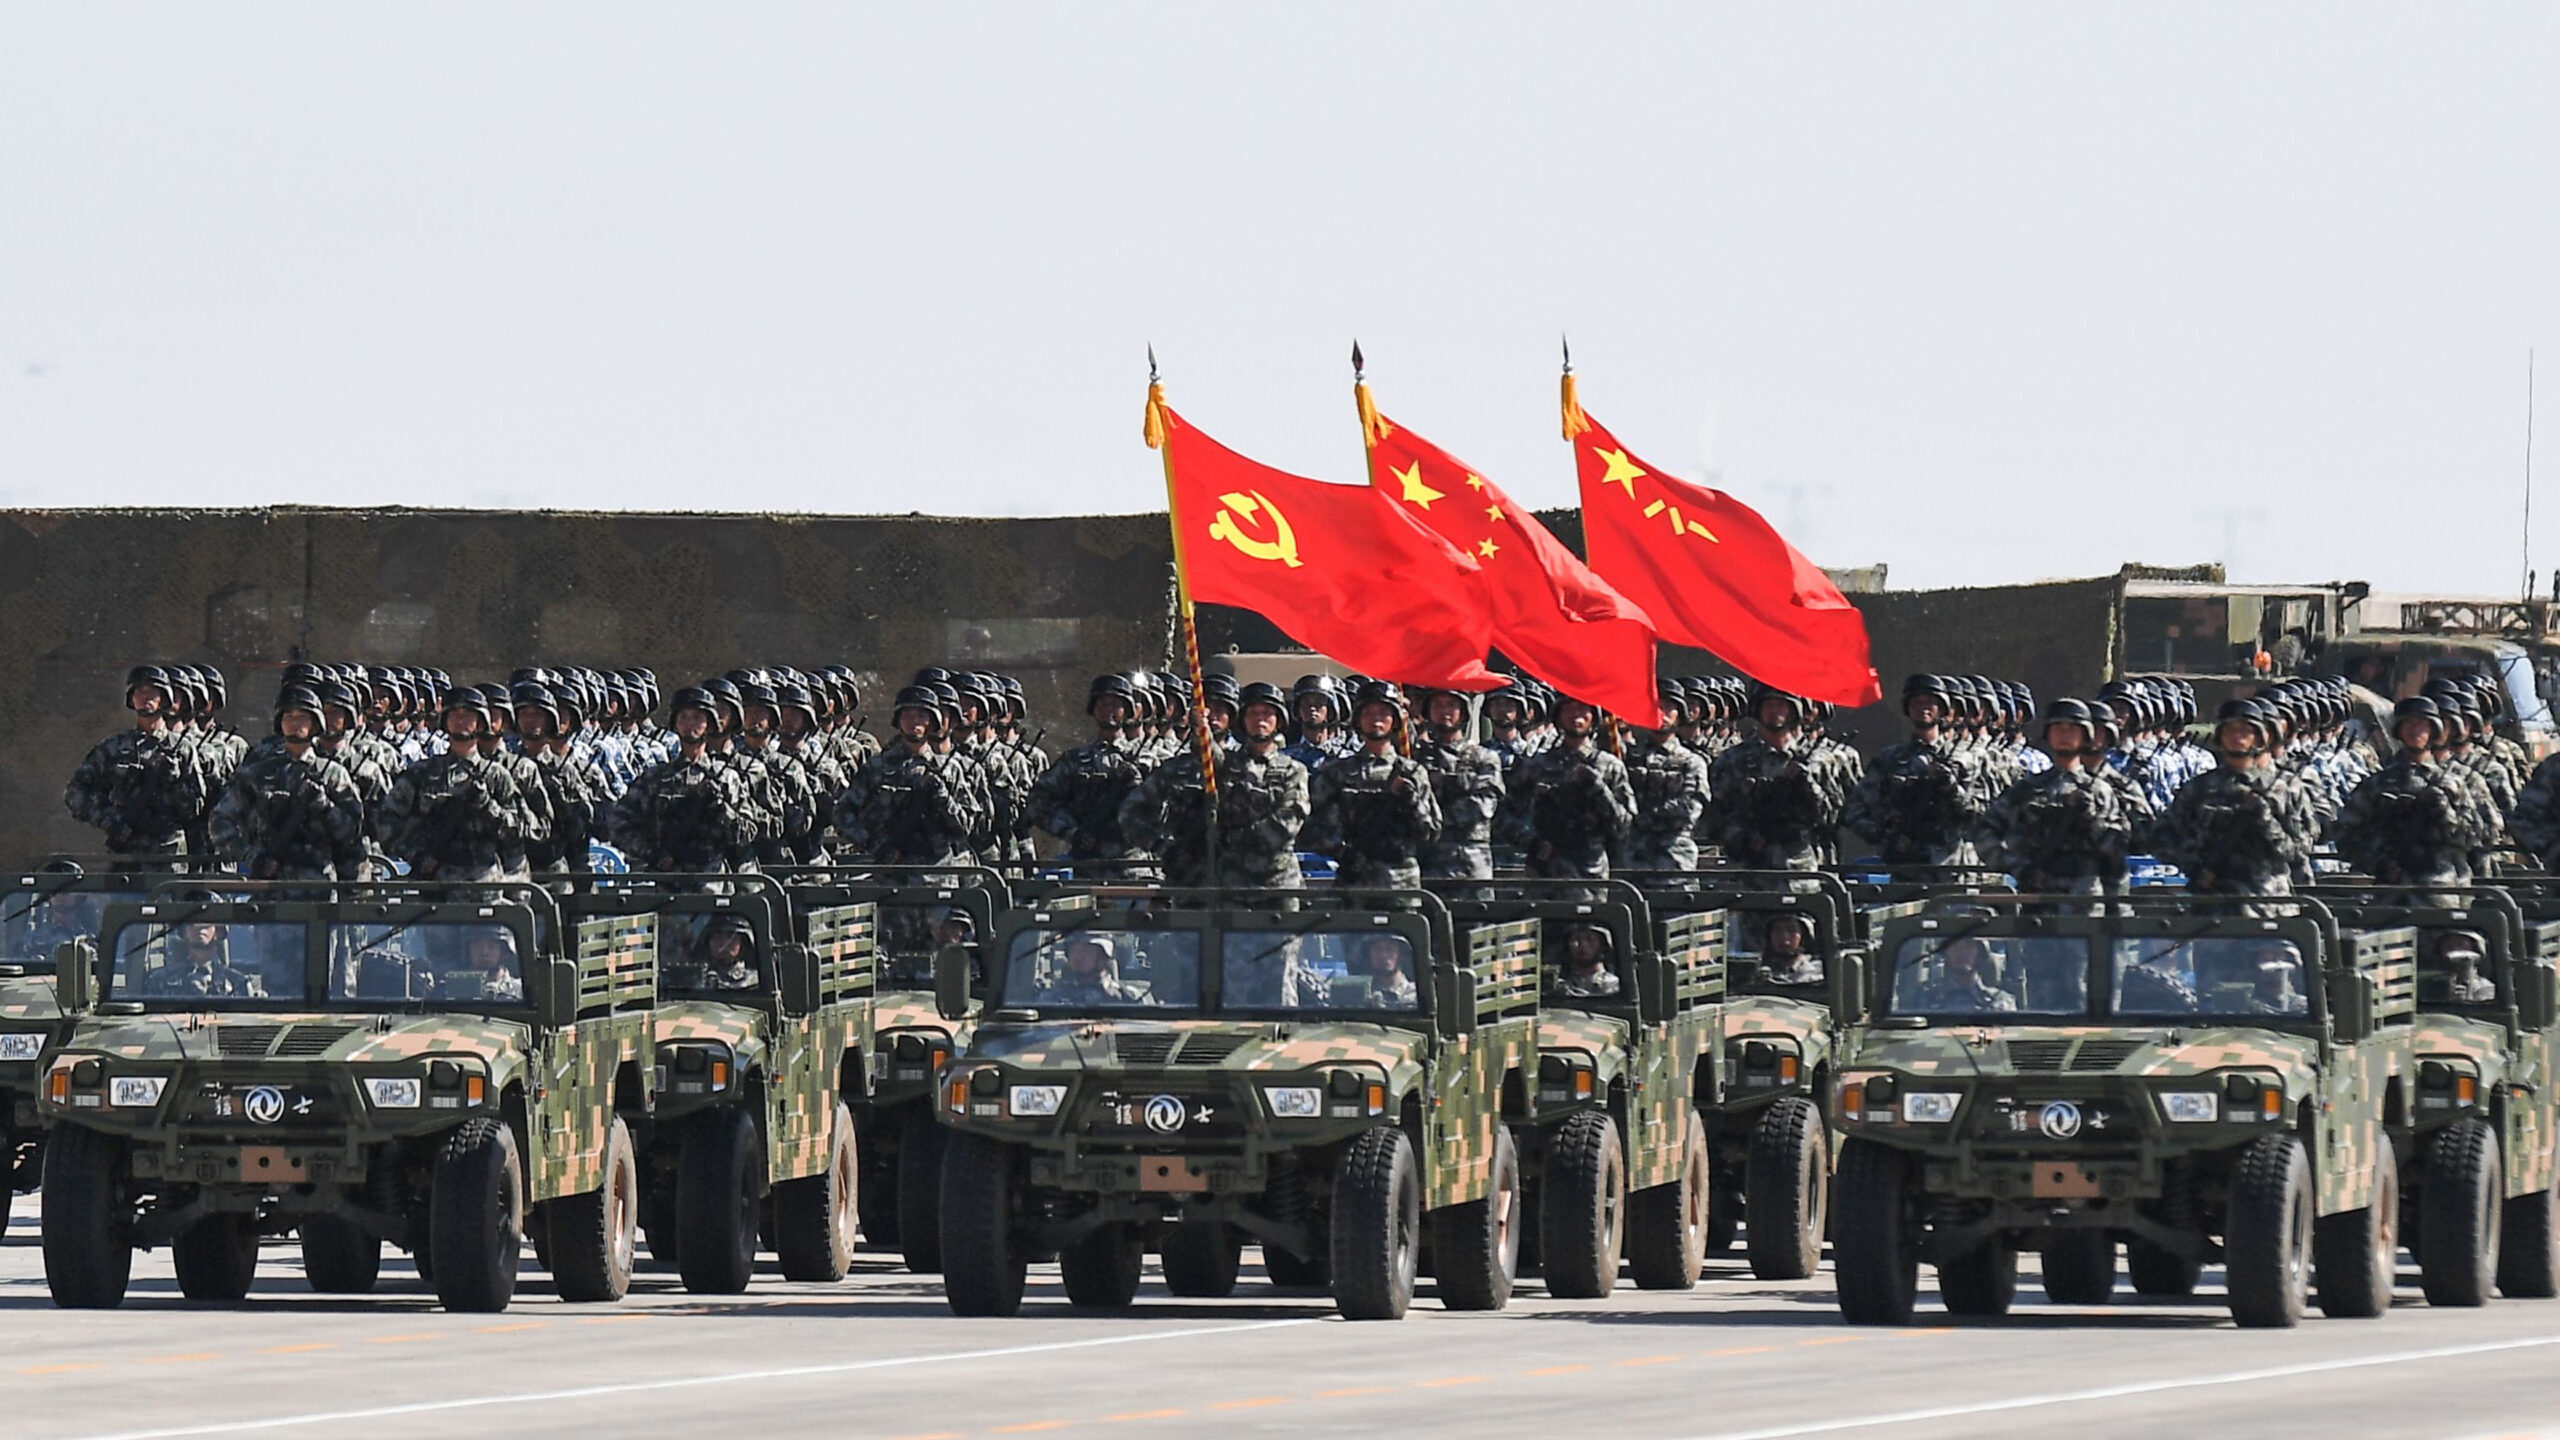 The last time there was a crisis in Taiwan, China's low-tech military was vastly outmatched by US forces. Not now.